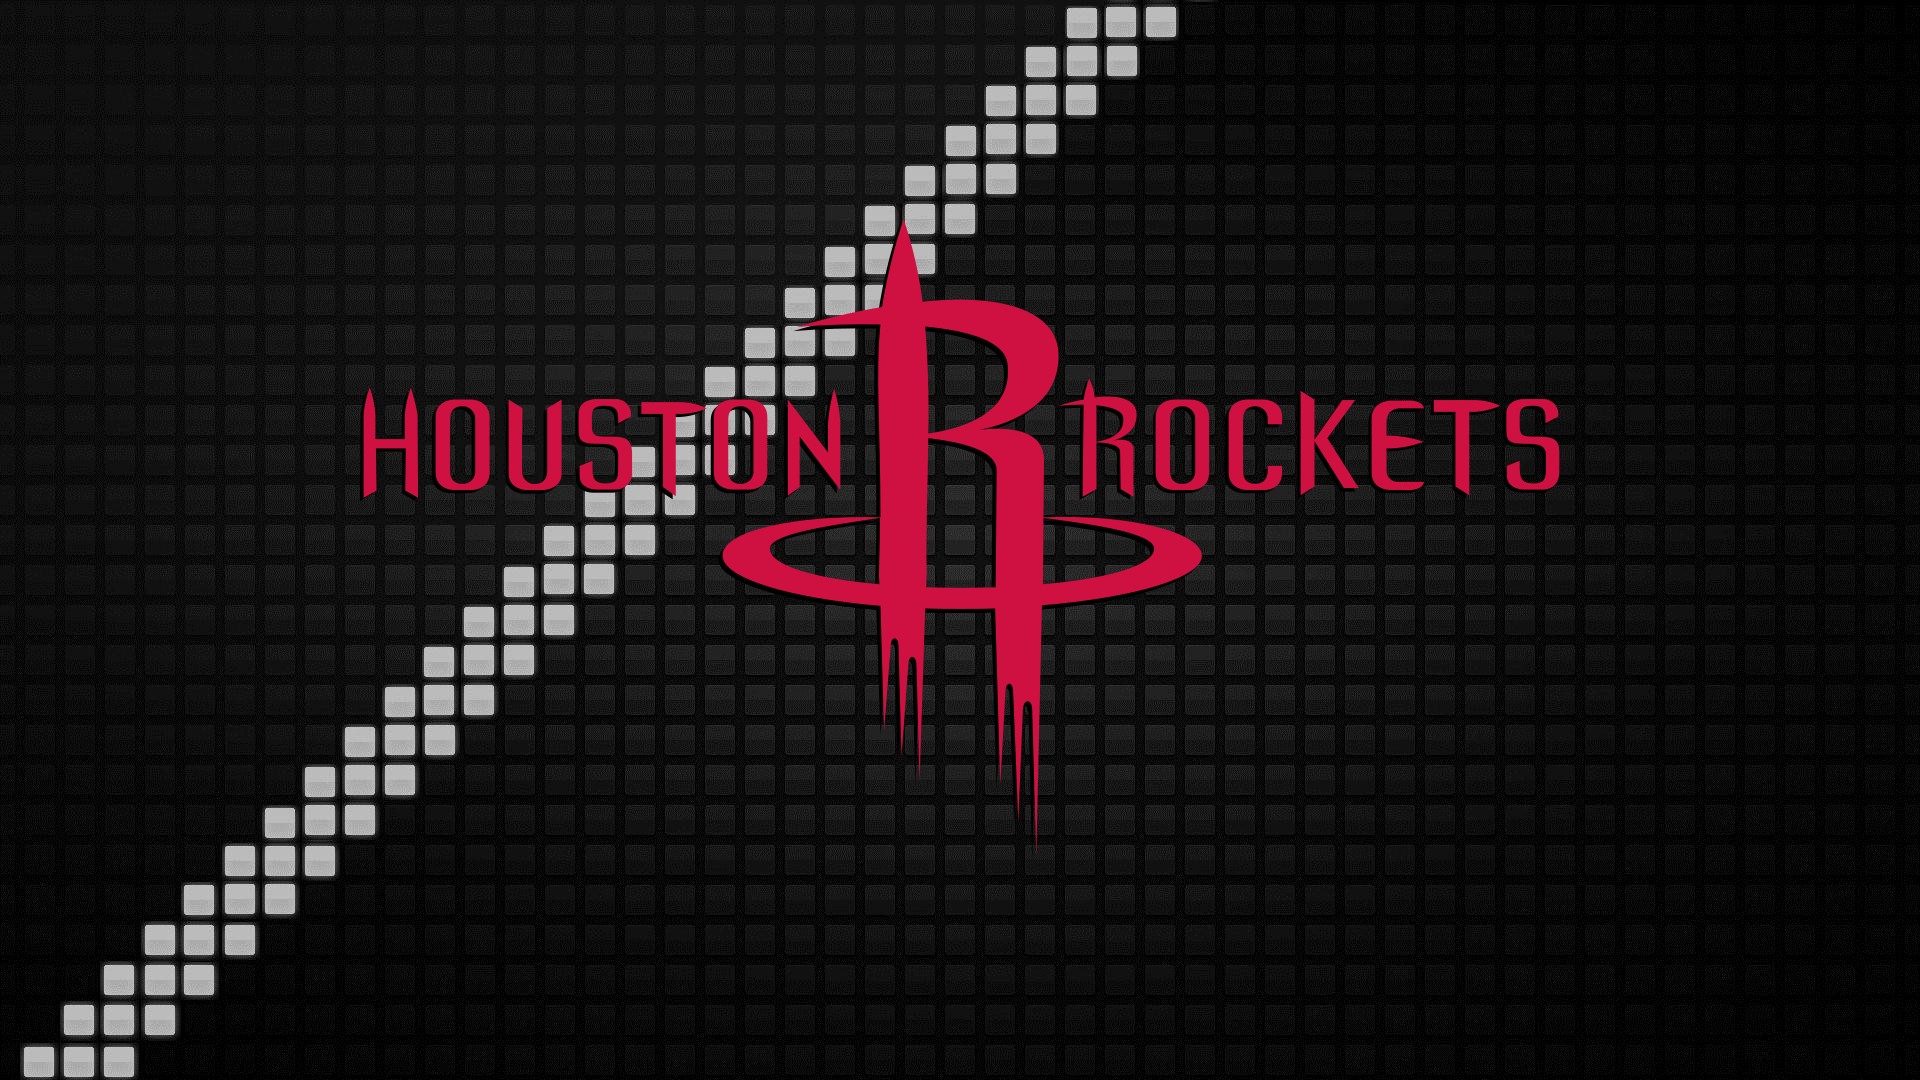 HD Backgrounds Rockets with image dimensions 1920x1080 pixel. You can make this wallpaper for your Desktop Computer Backgrounds, Windows or Mac Screensavers, iPhone Lock screen, Tablet or Android and another Mobile Phone device